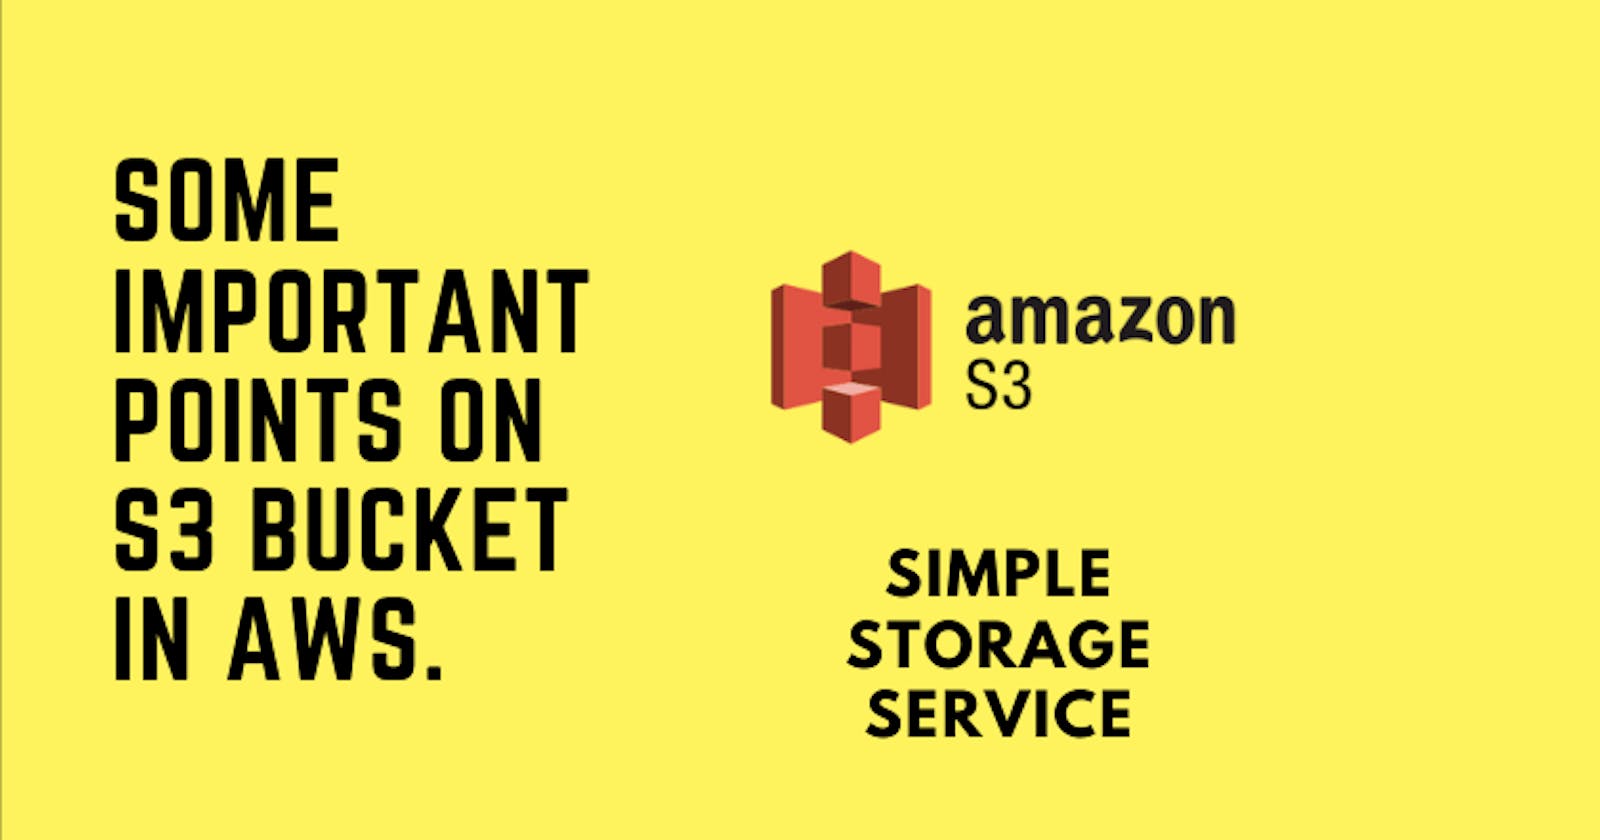 S3 (Simple storage service) in AWS.